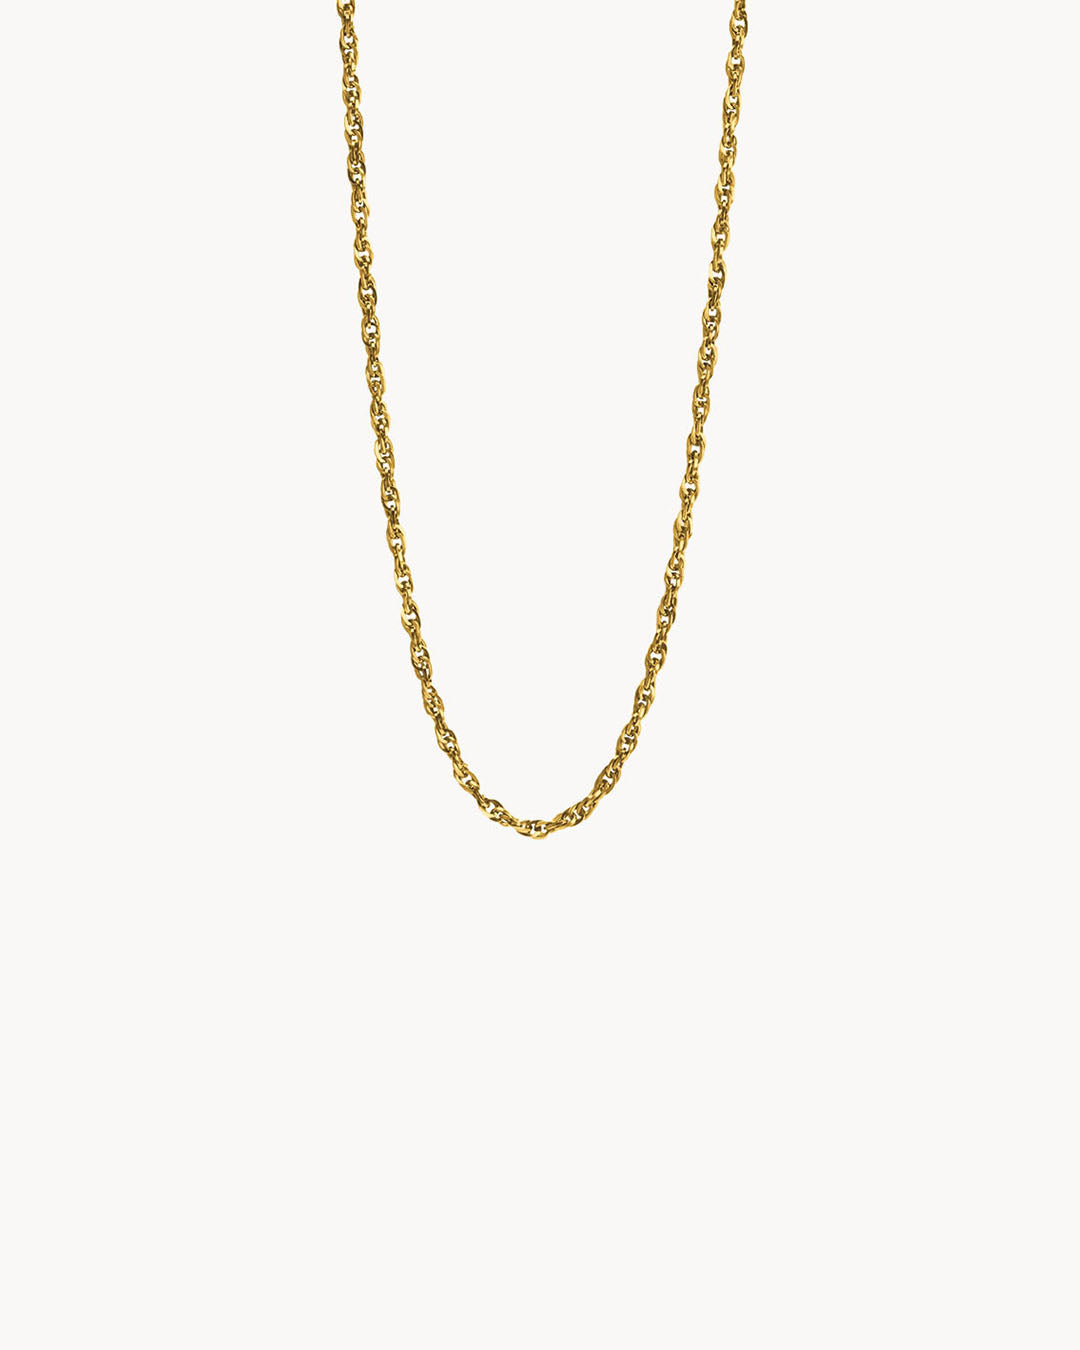 Dainty Shimmer Rope Chain